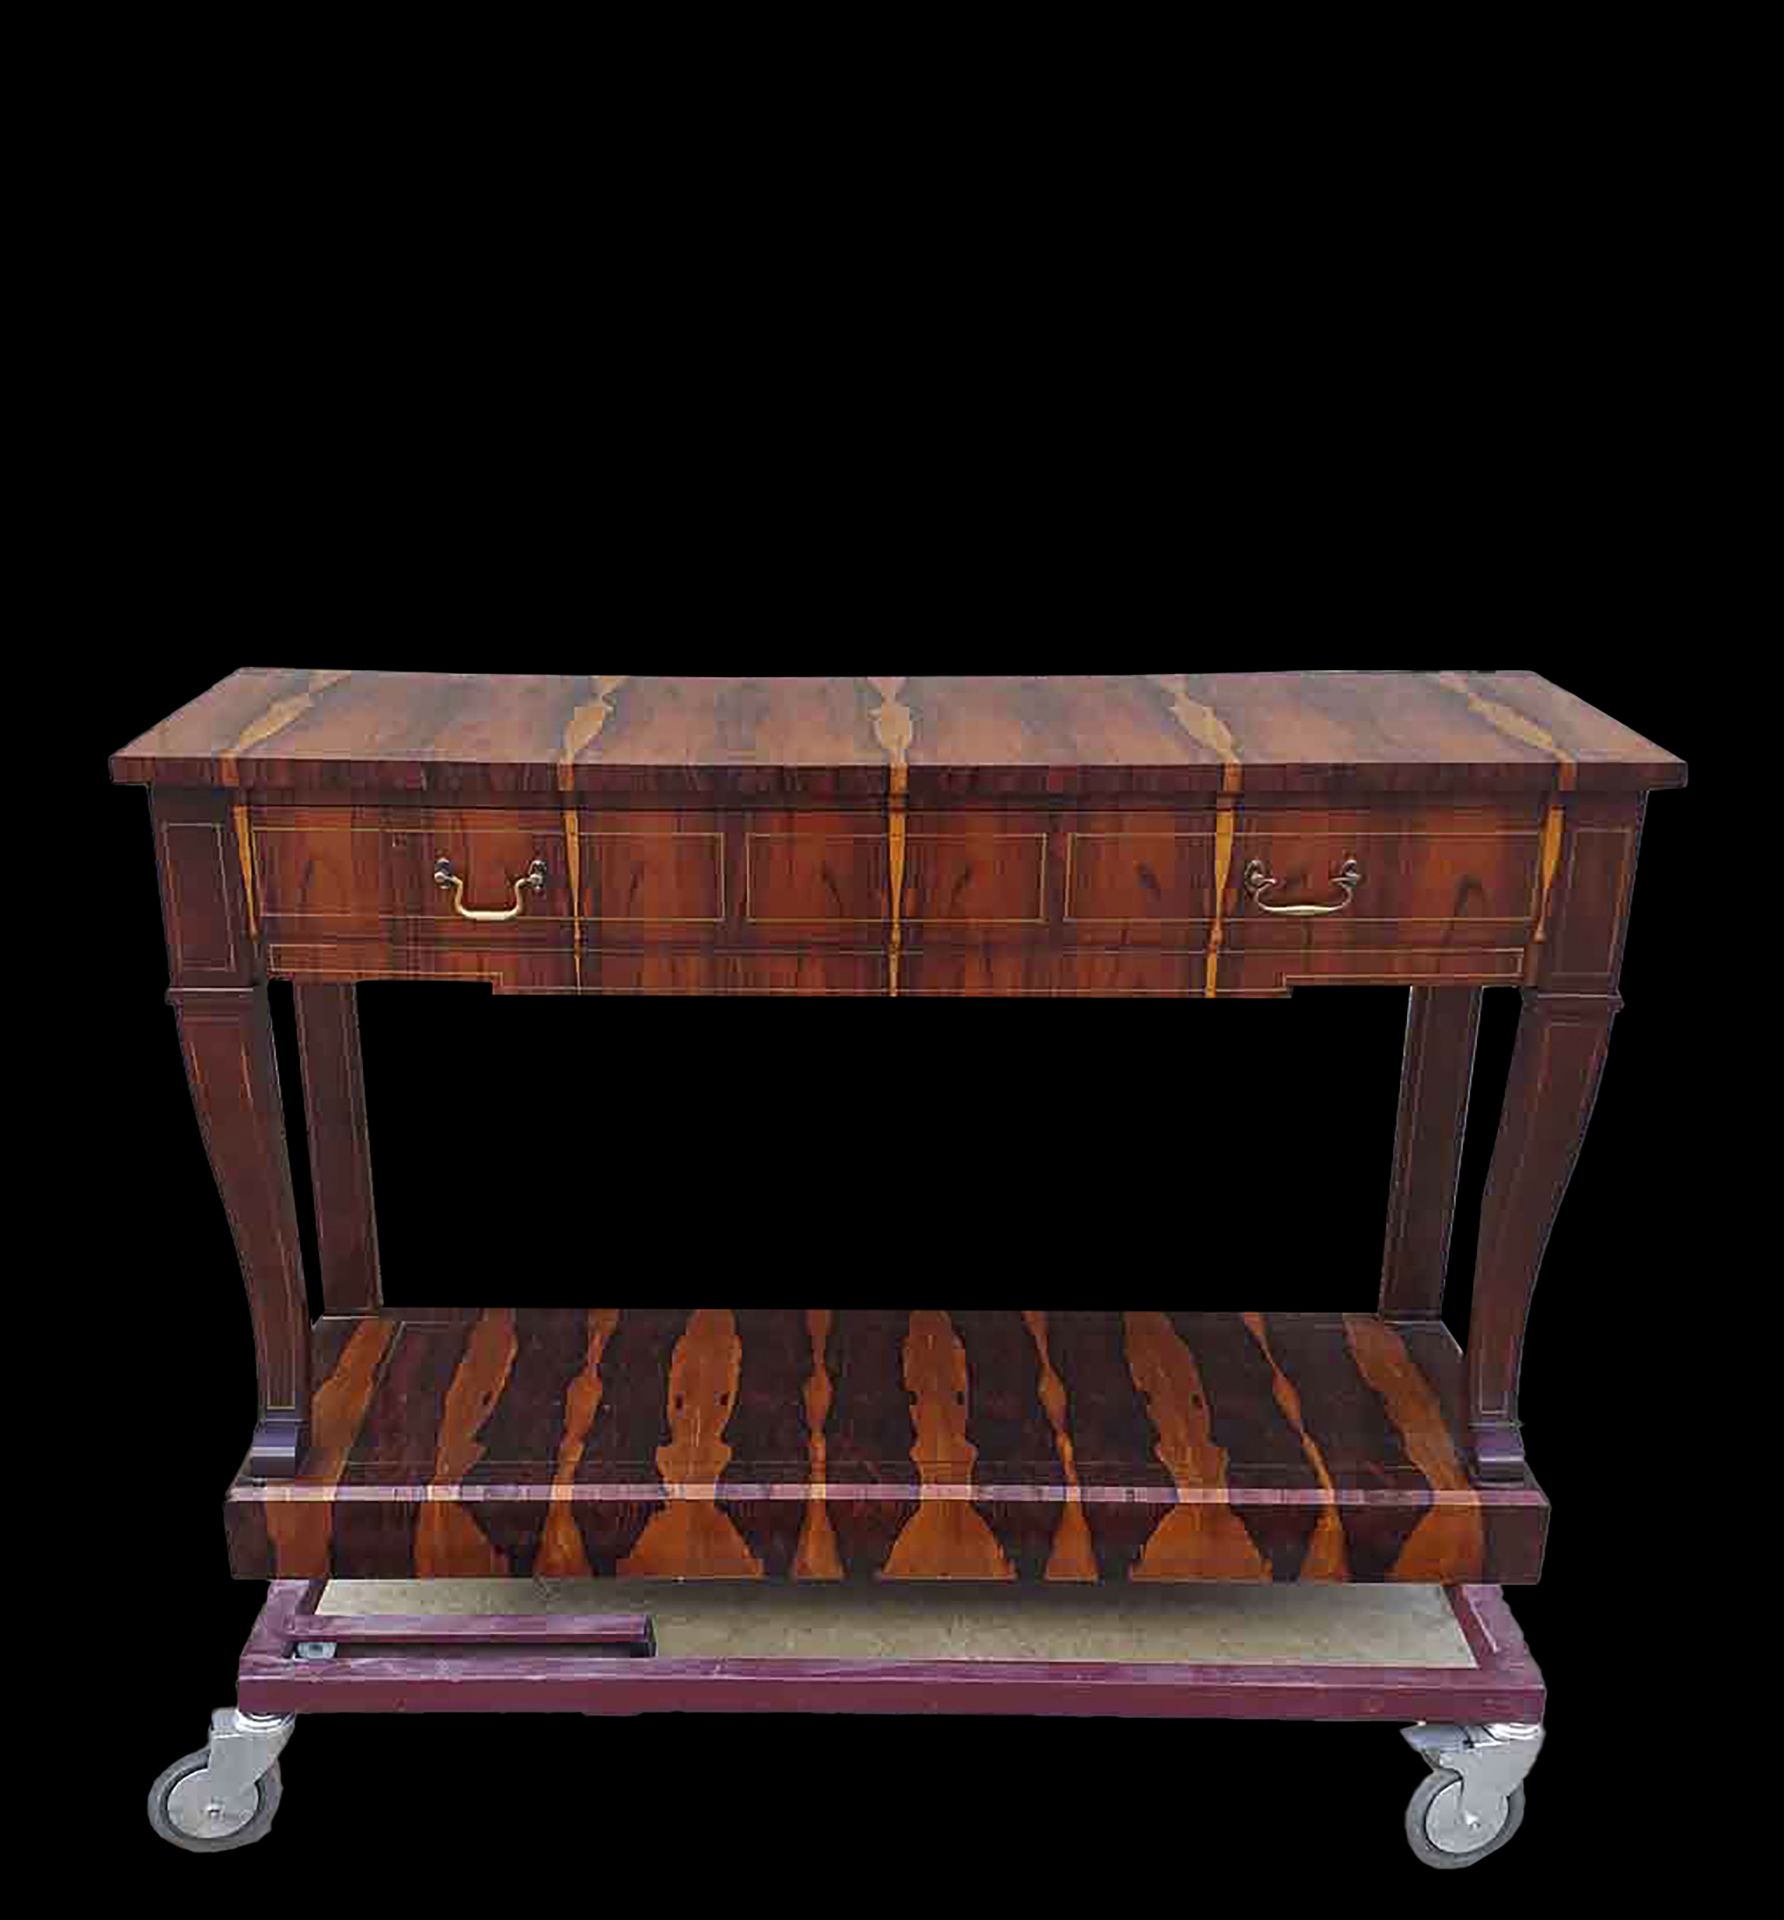 Elegant Italian Art Deco Console in rosewood palm marquetry, 1930s-1940s